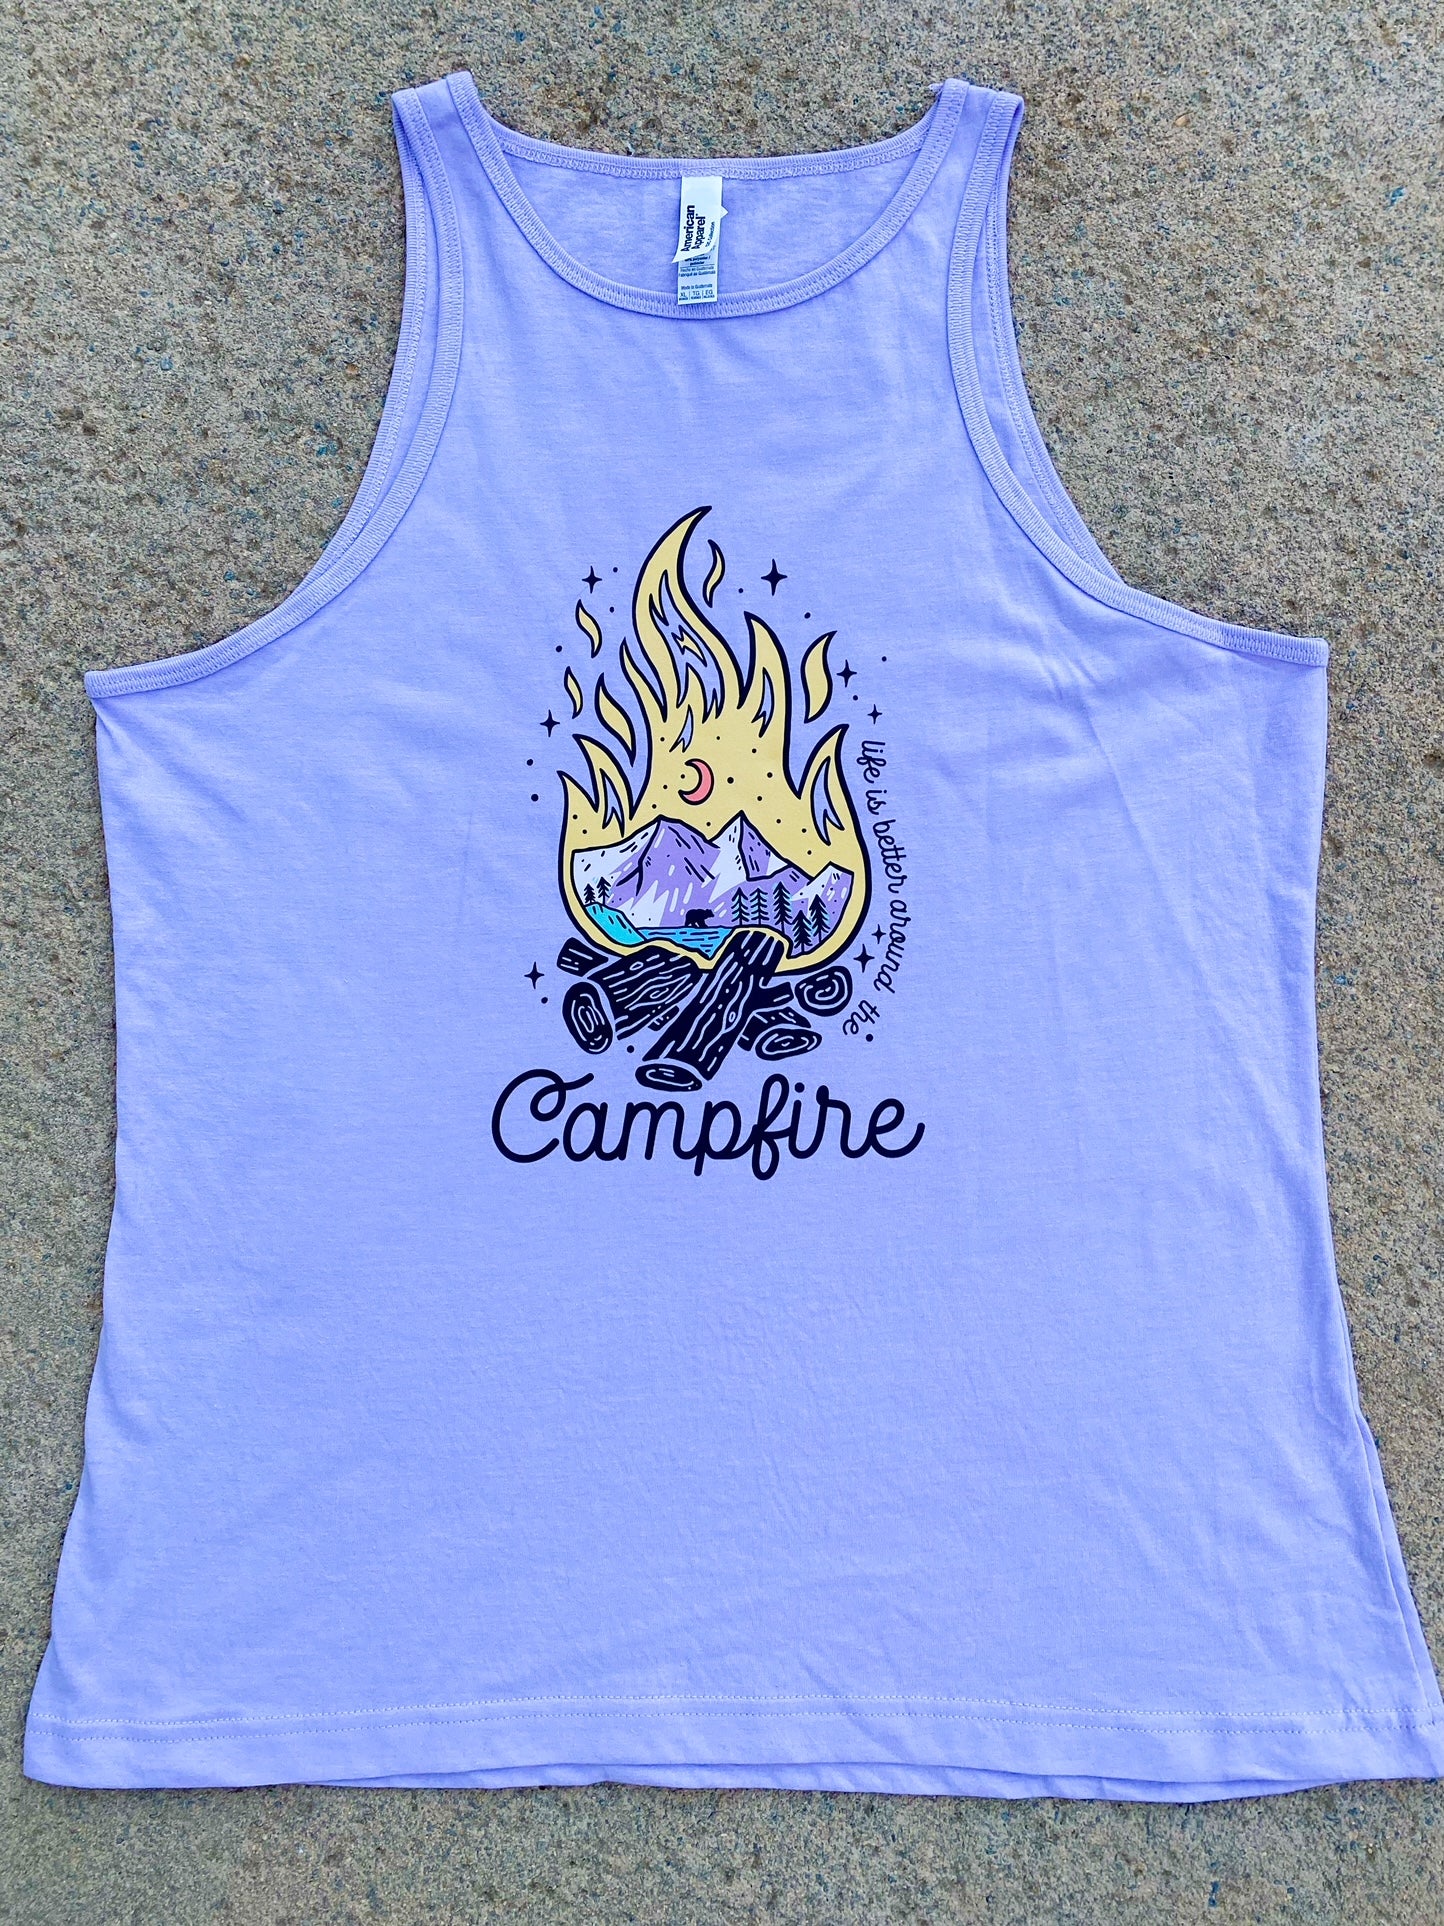 Lilac Tank Top with a campfire in the middle. The flame shows an outdoor scene of the mountains and moon. Along the right side of the flame it says "life is better around the" and then at the bottom of the flame it says "campfire"